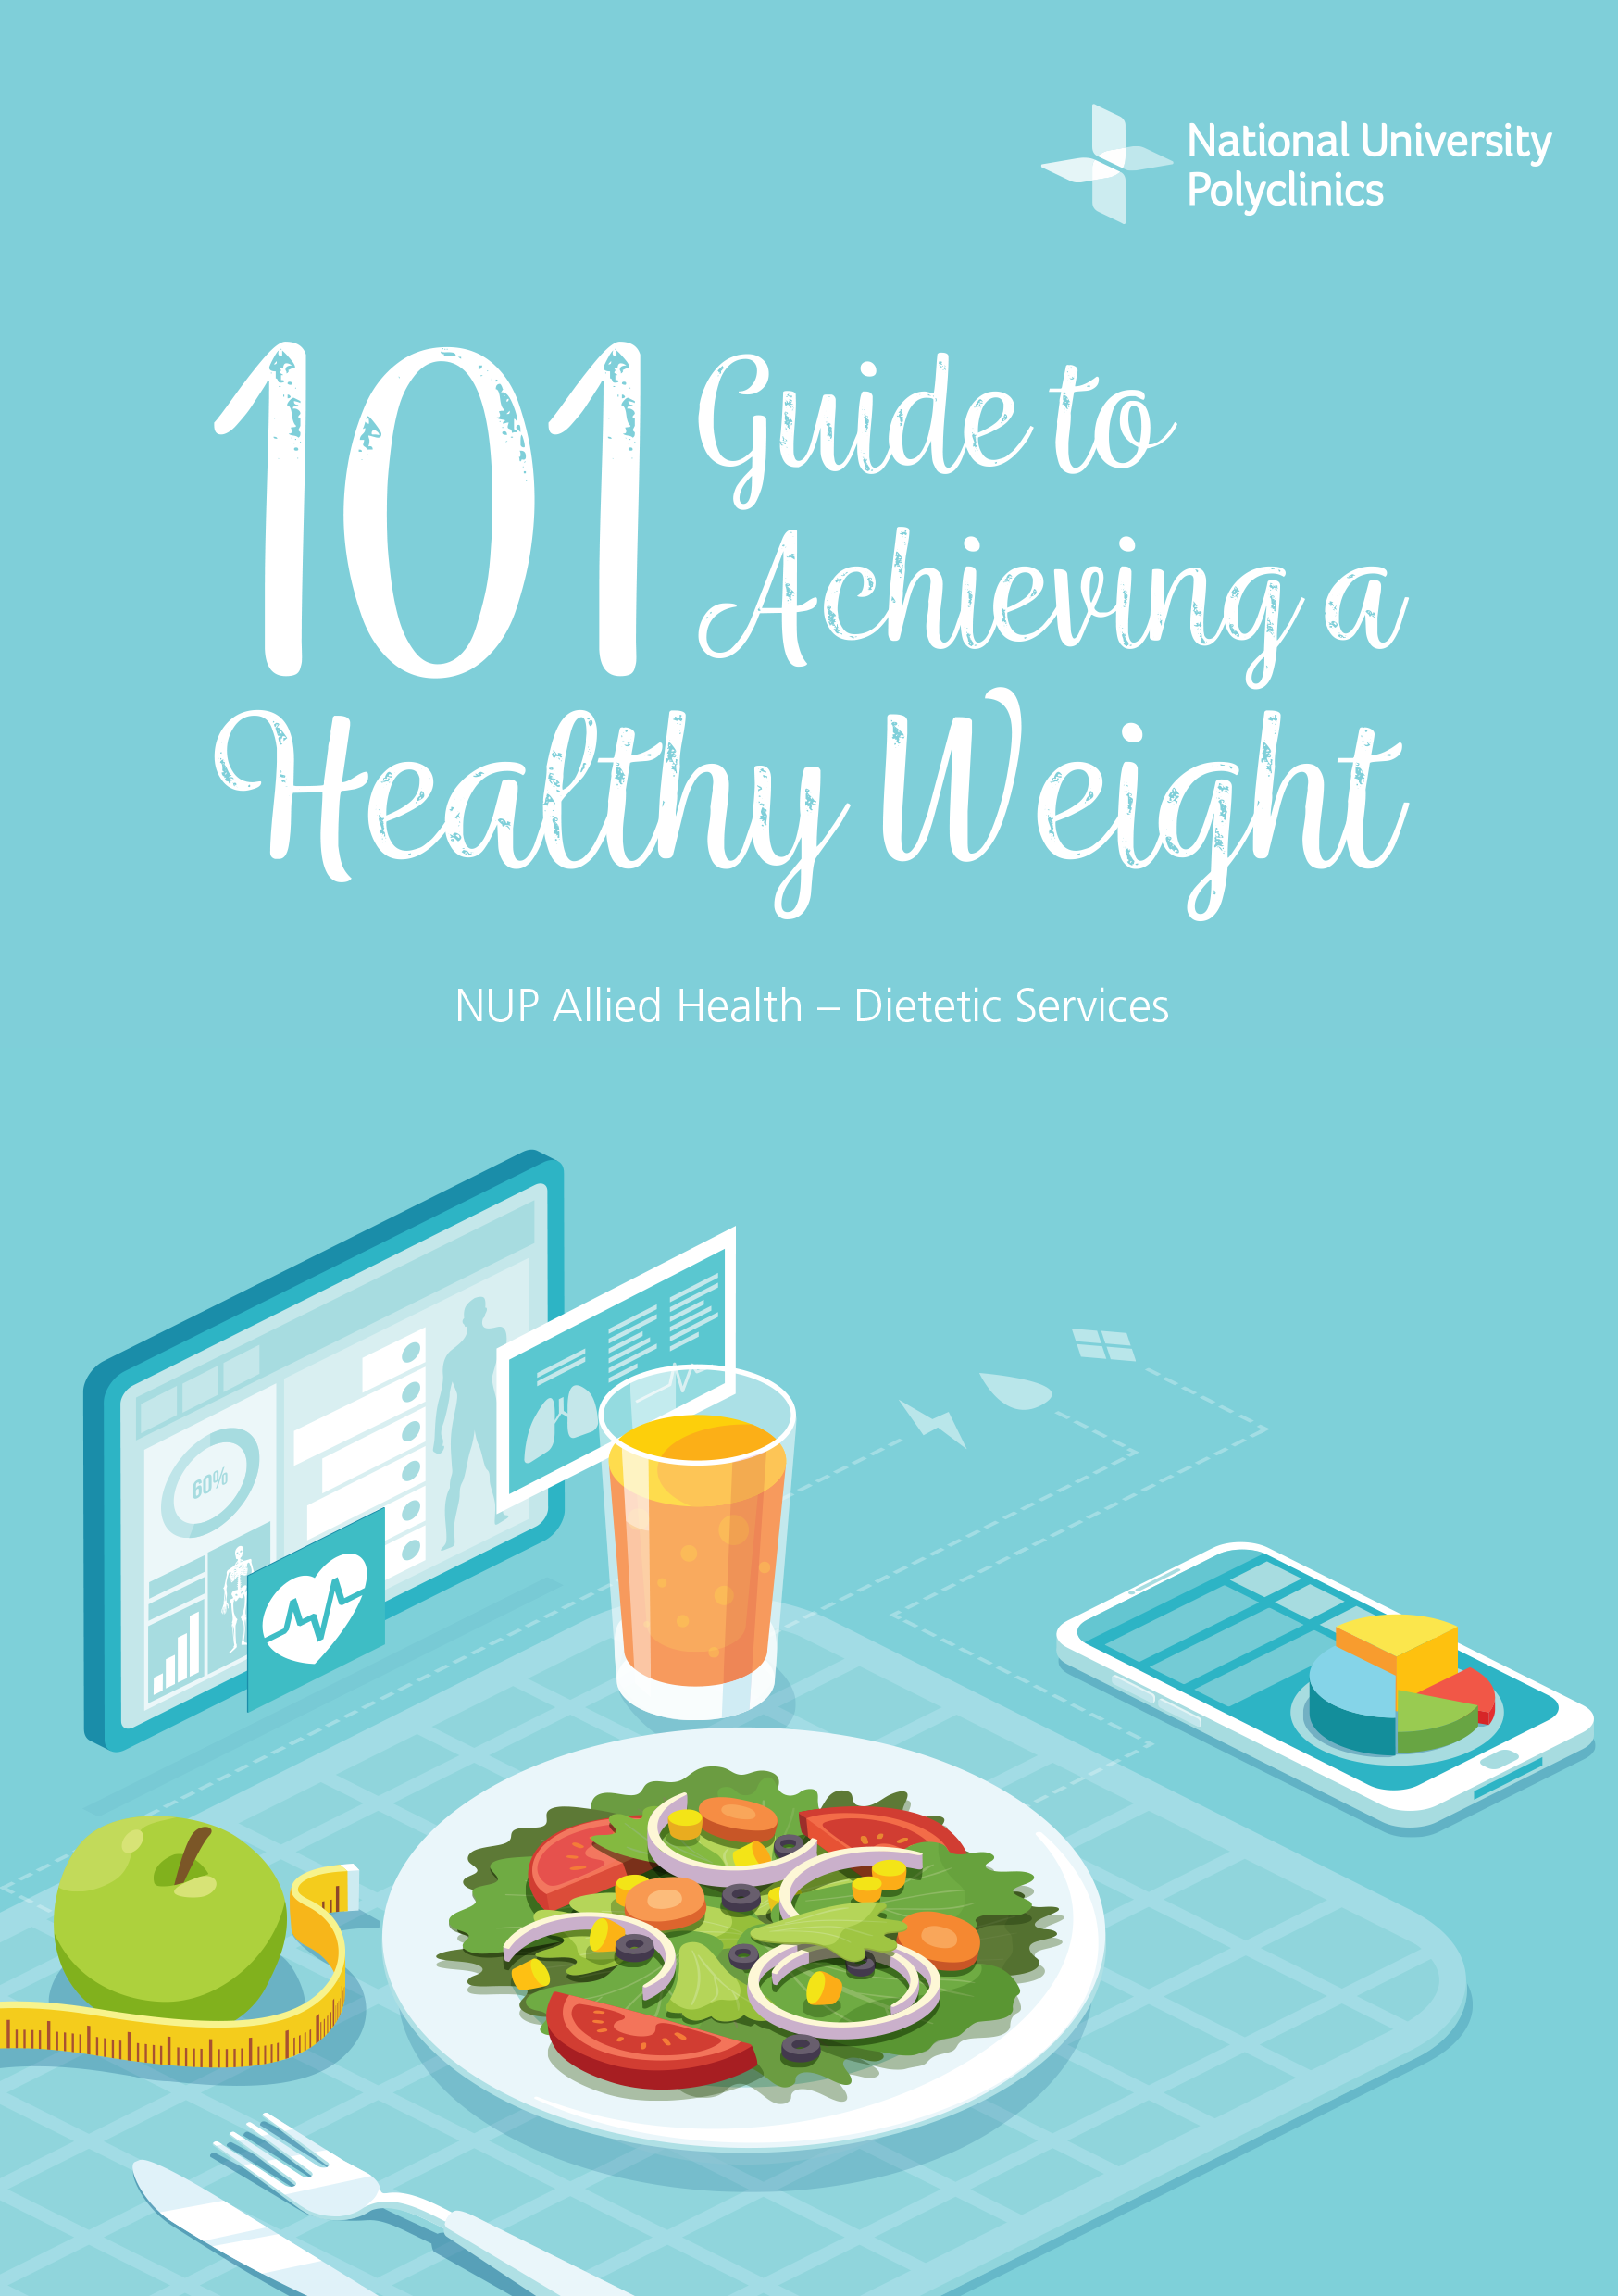 101 Guide to Achieving a Healthy Weight